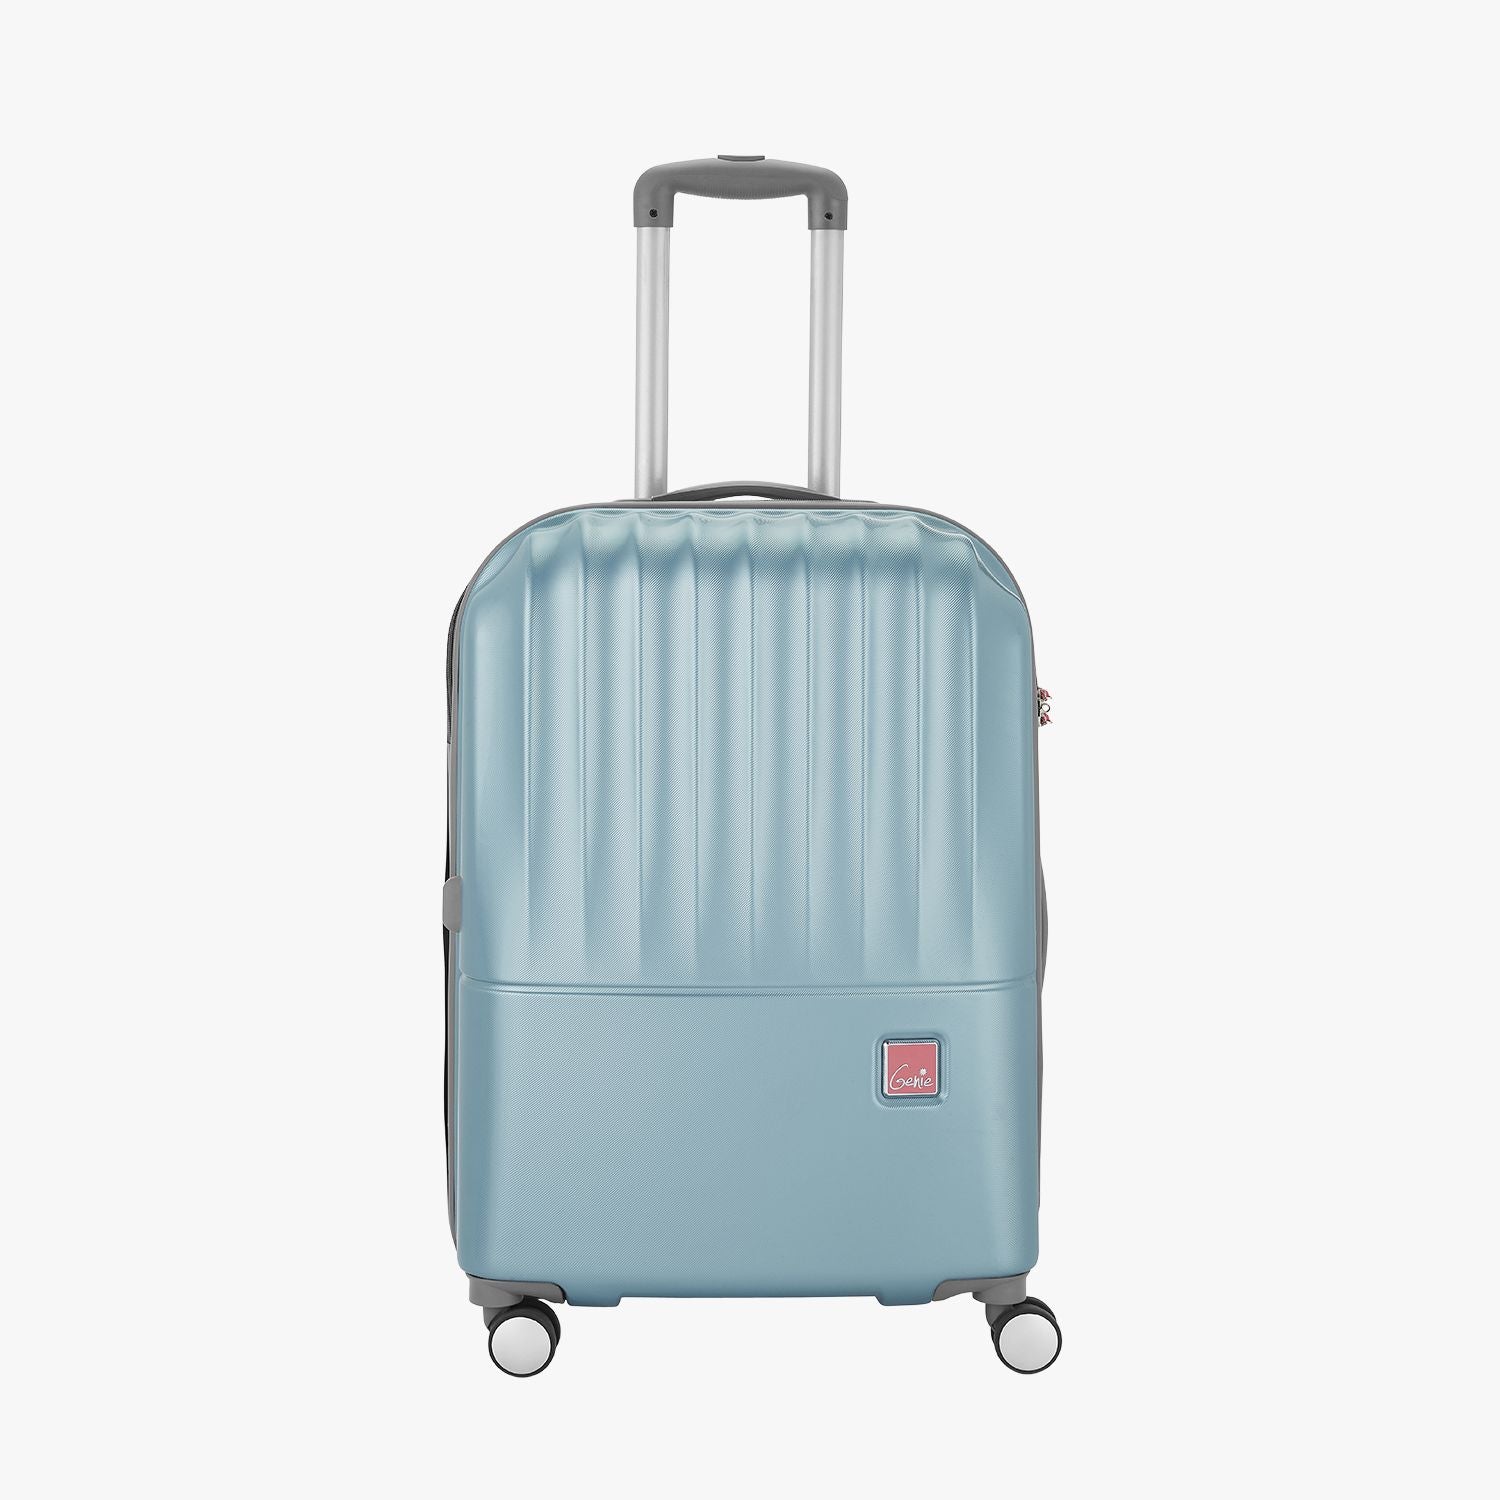 Genie Palm Pearl Blue Trolley Bag With Dual Wheels & Fixed Combination Lock